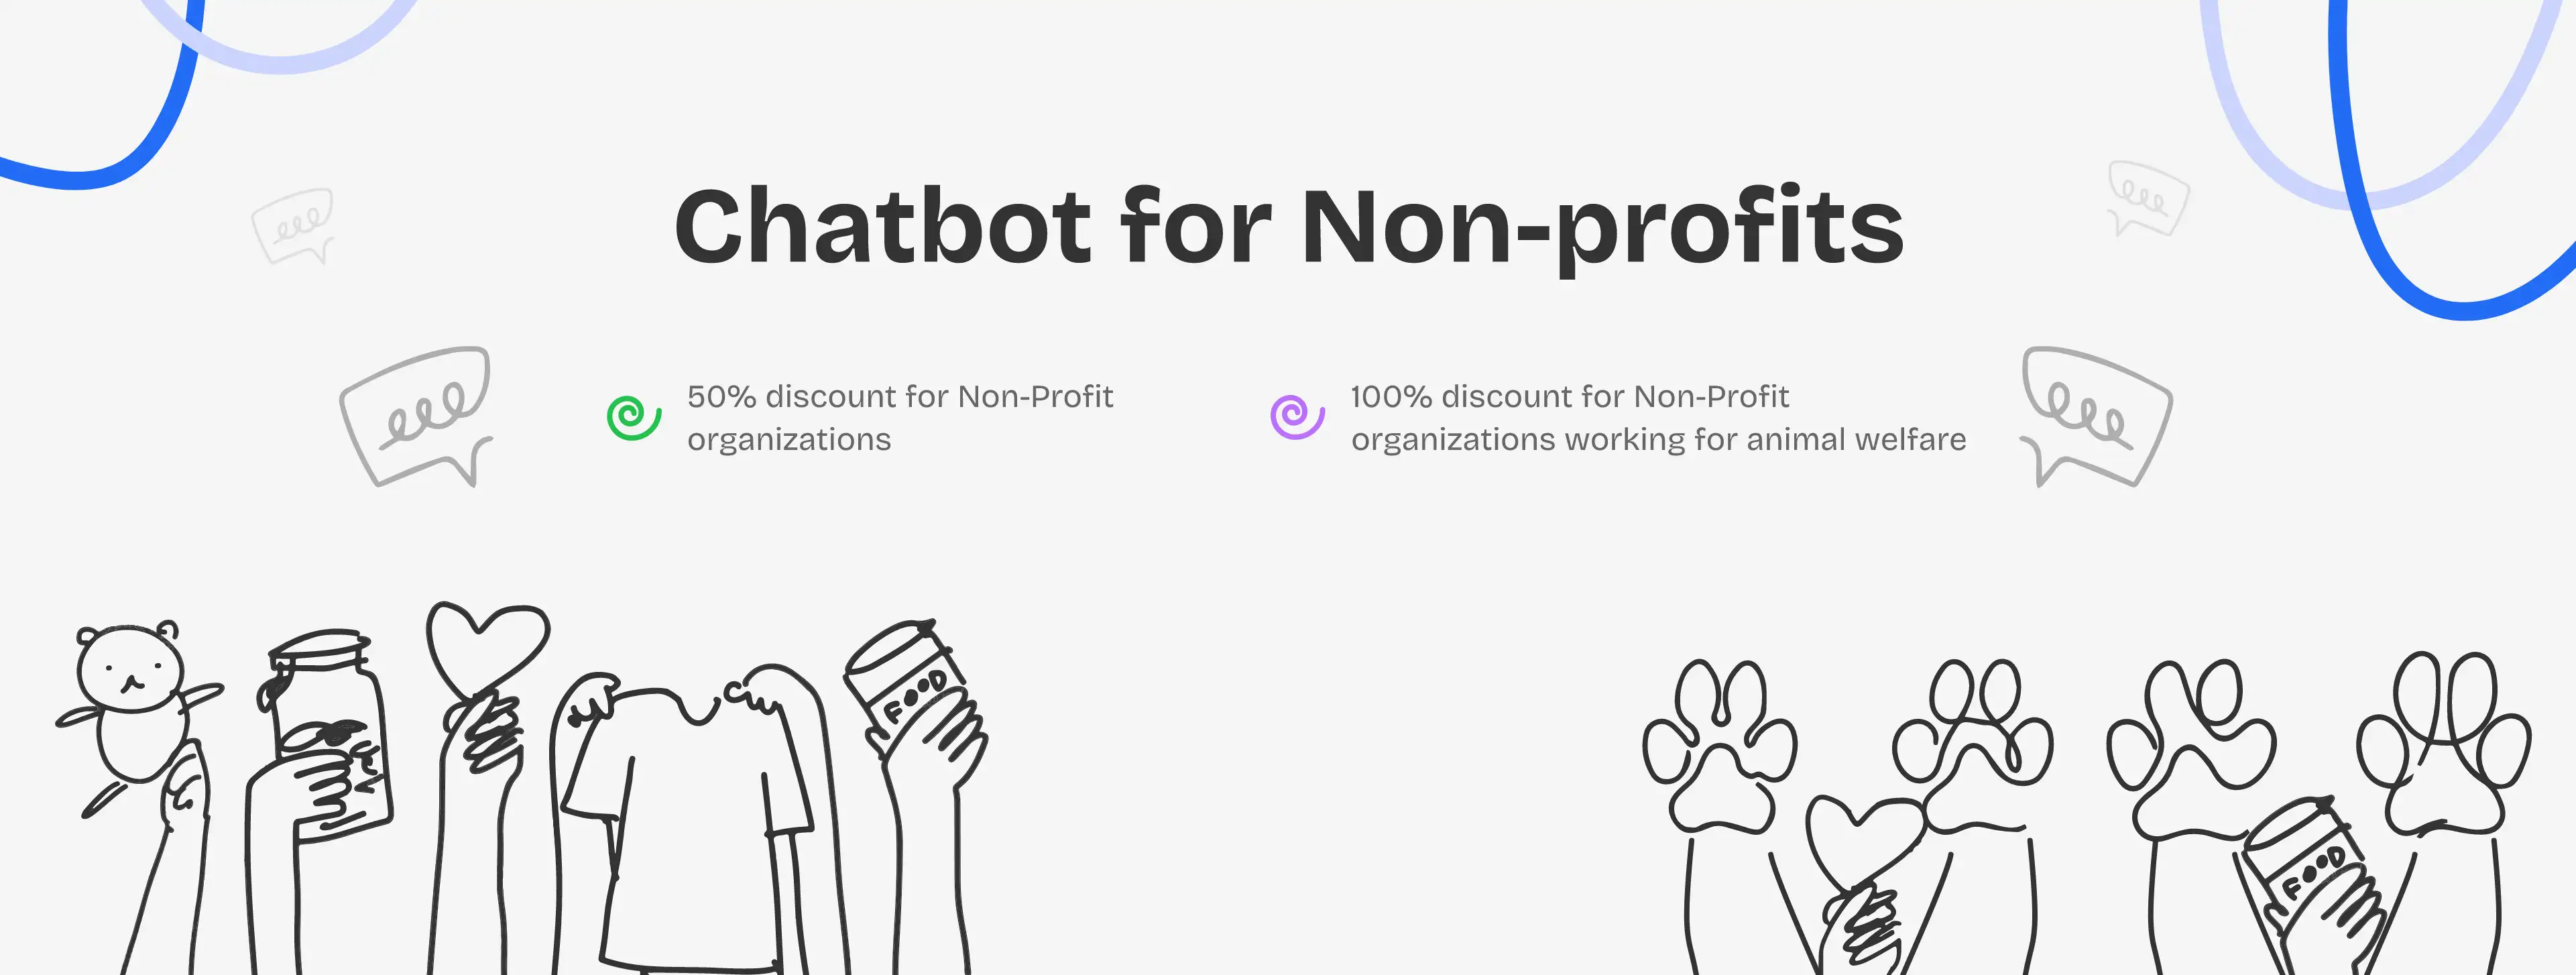 Chatbot for non profit organizations